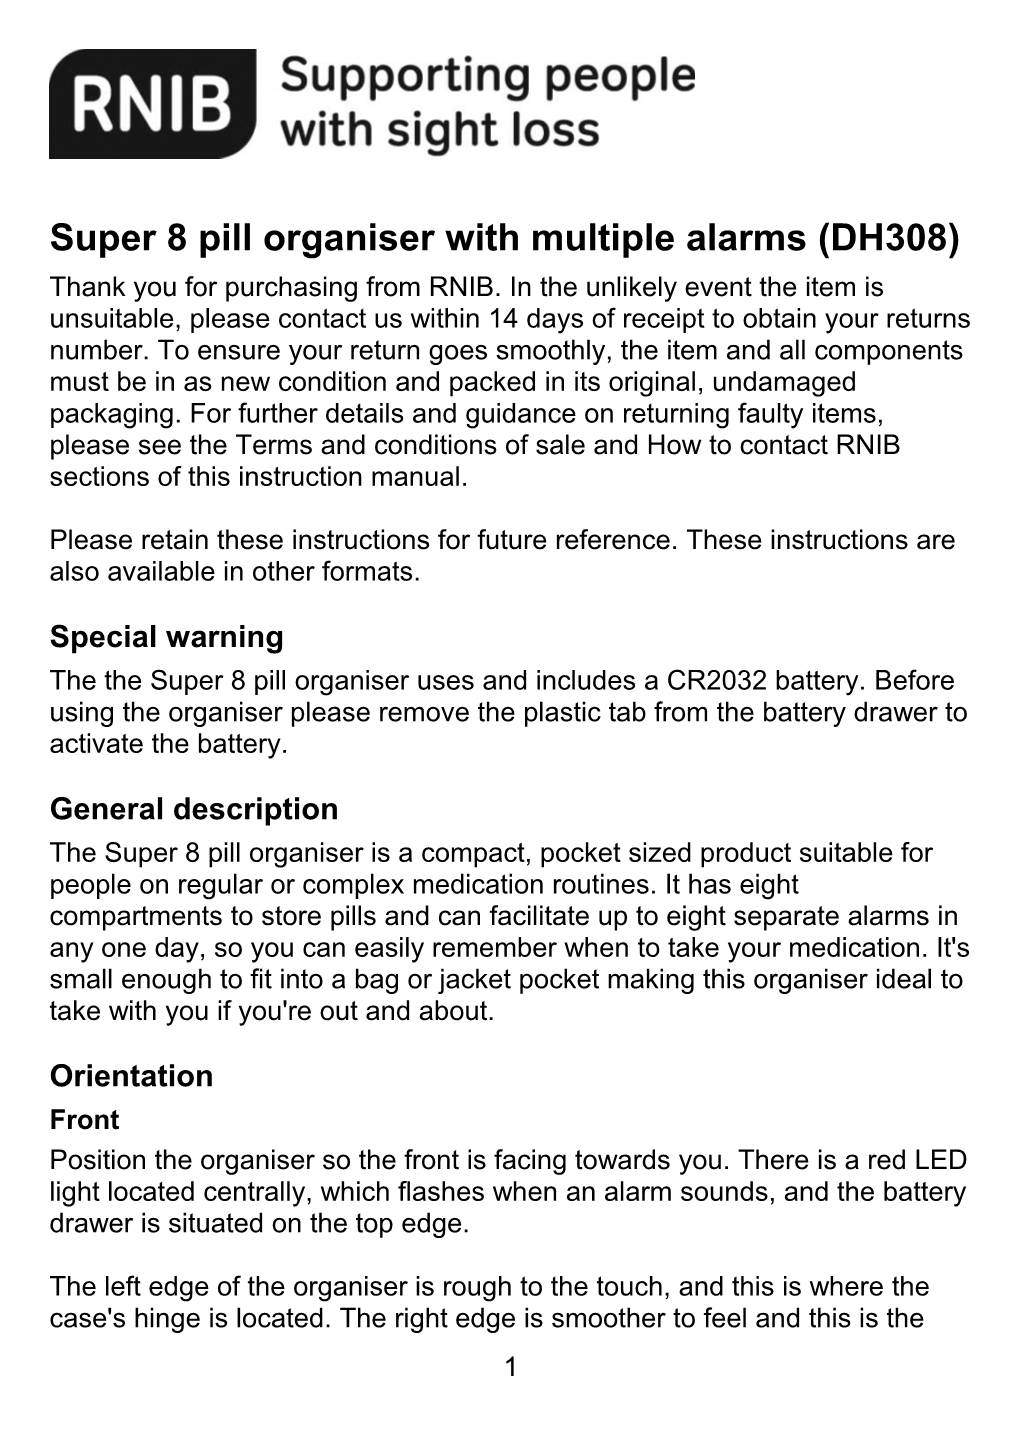 Super 8 Pill Organiser with Multiple Alarms (DH308)